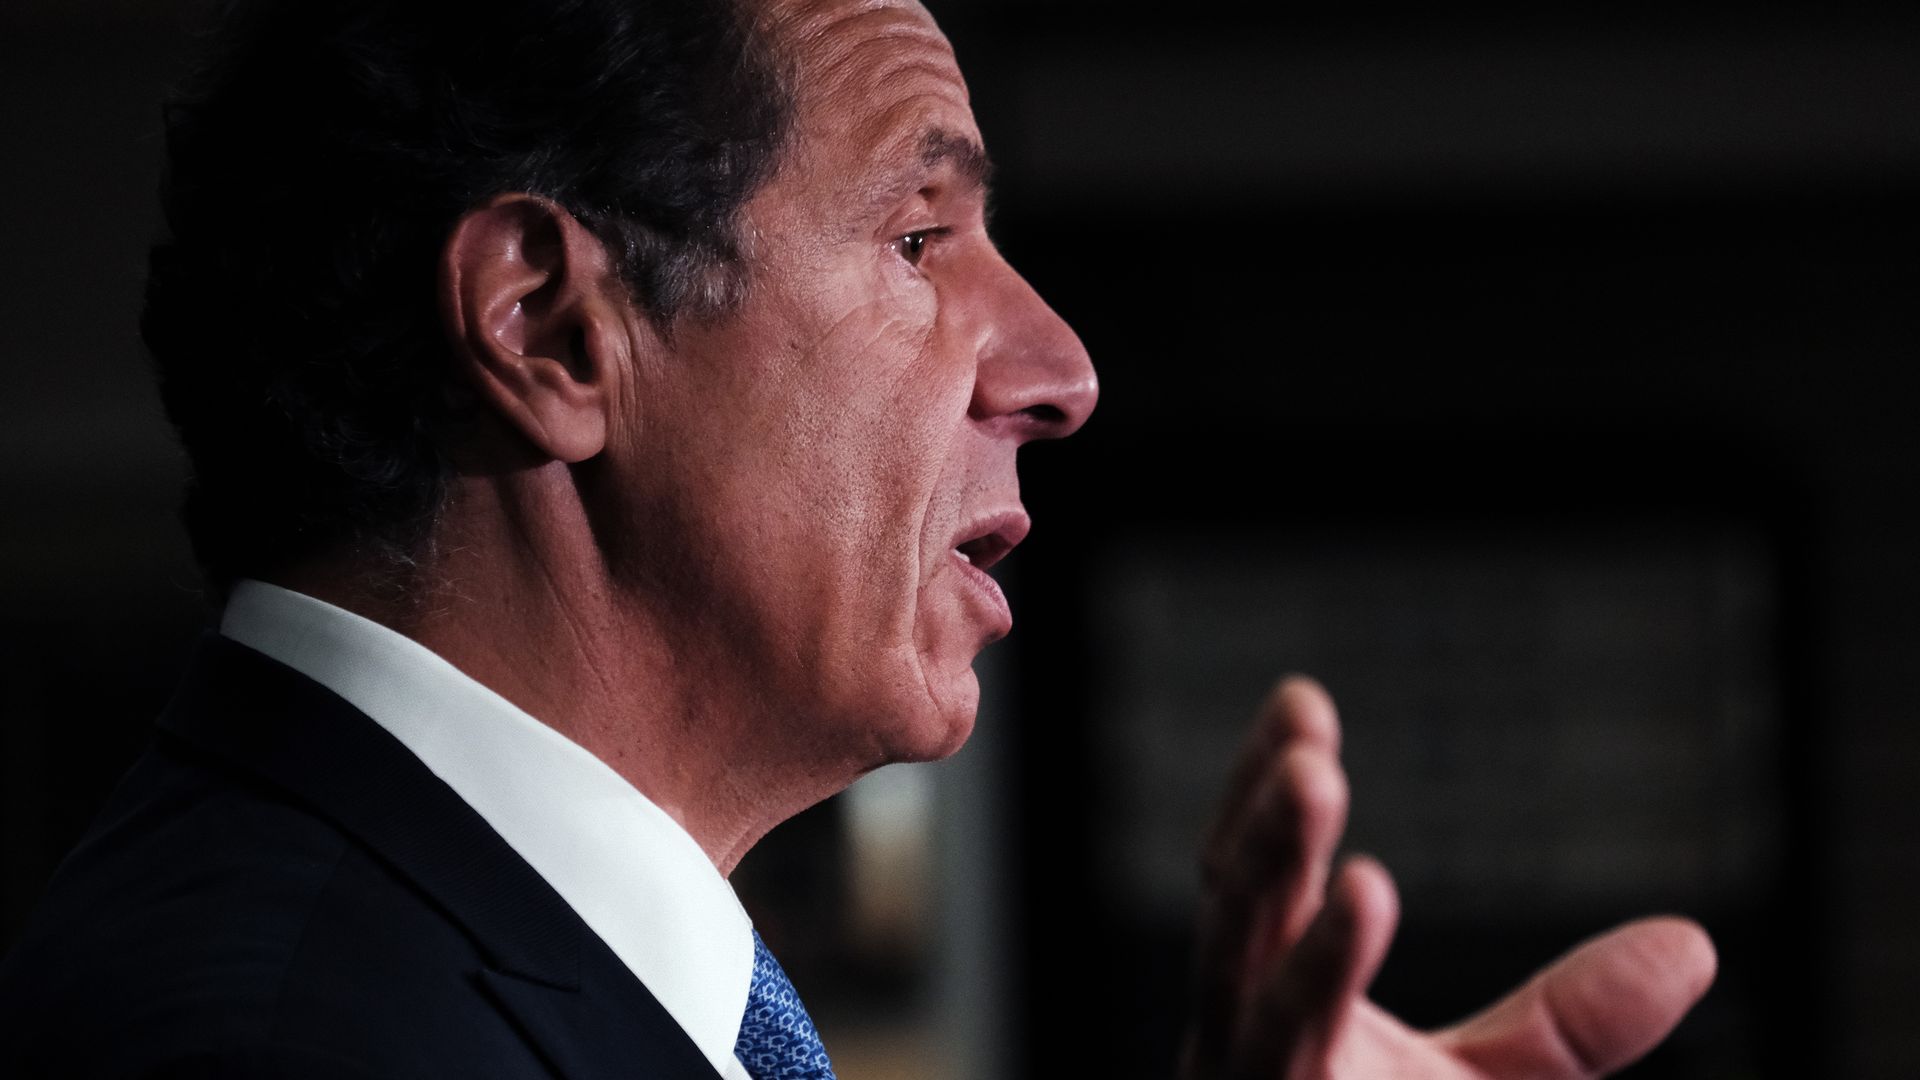 Picture of Andrew Cuomo's side profile